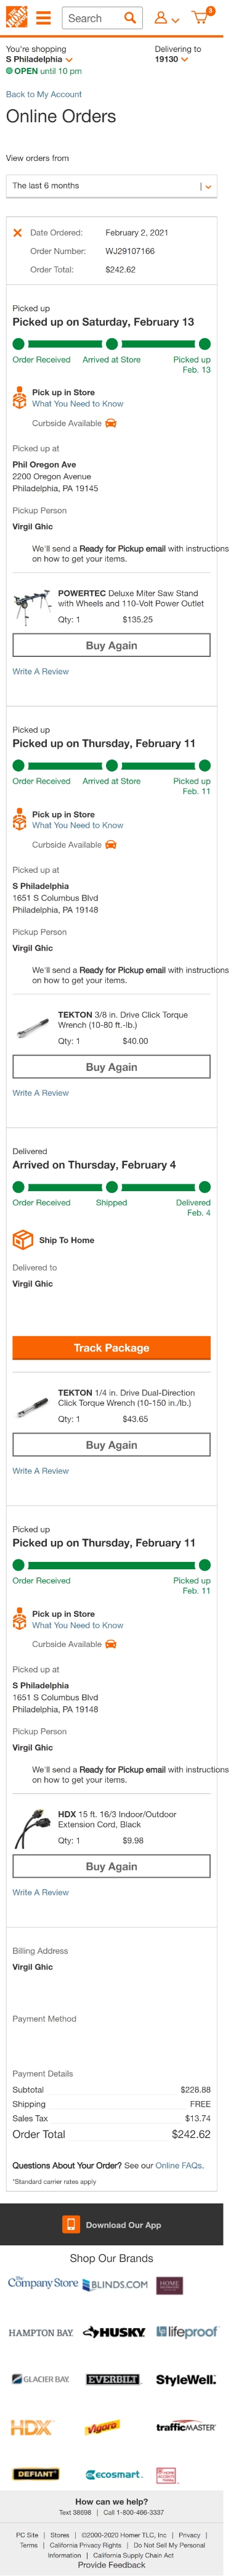 homedepot purchase history mobile